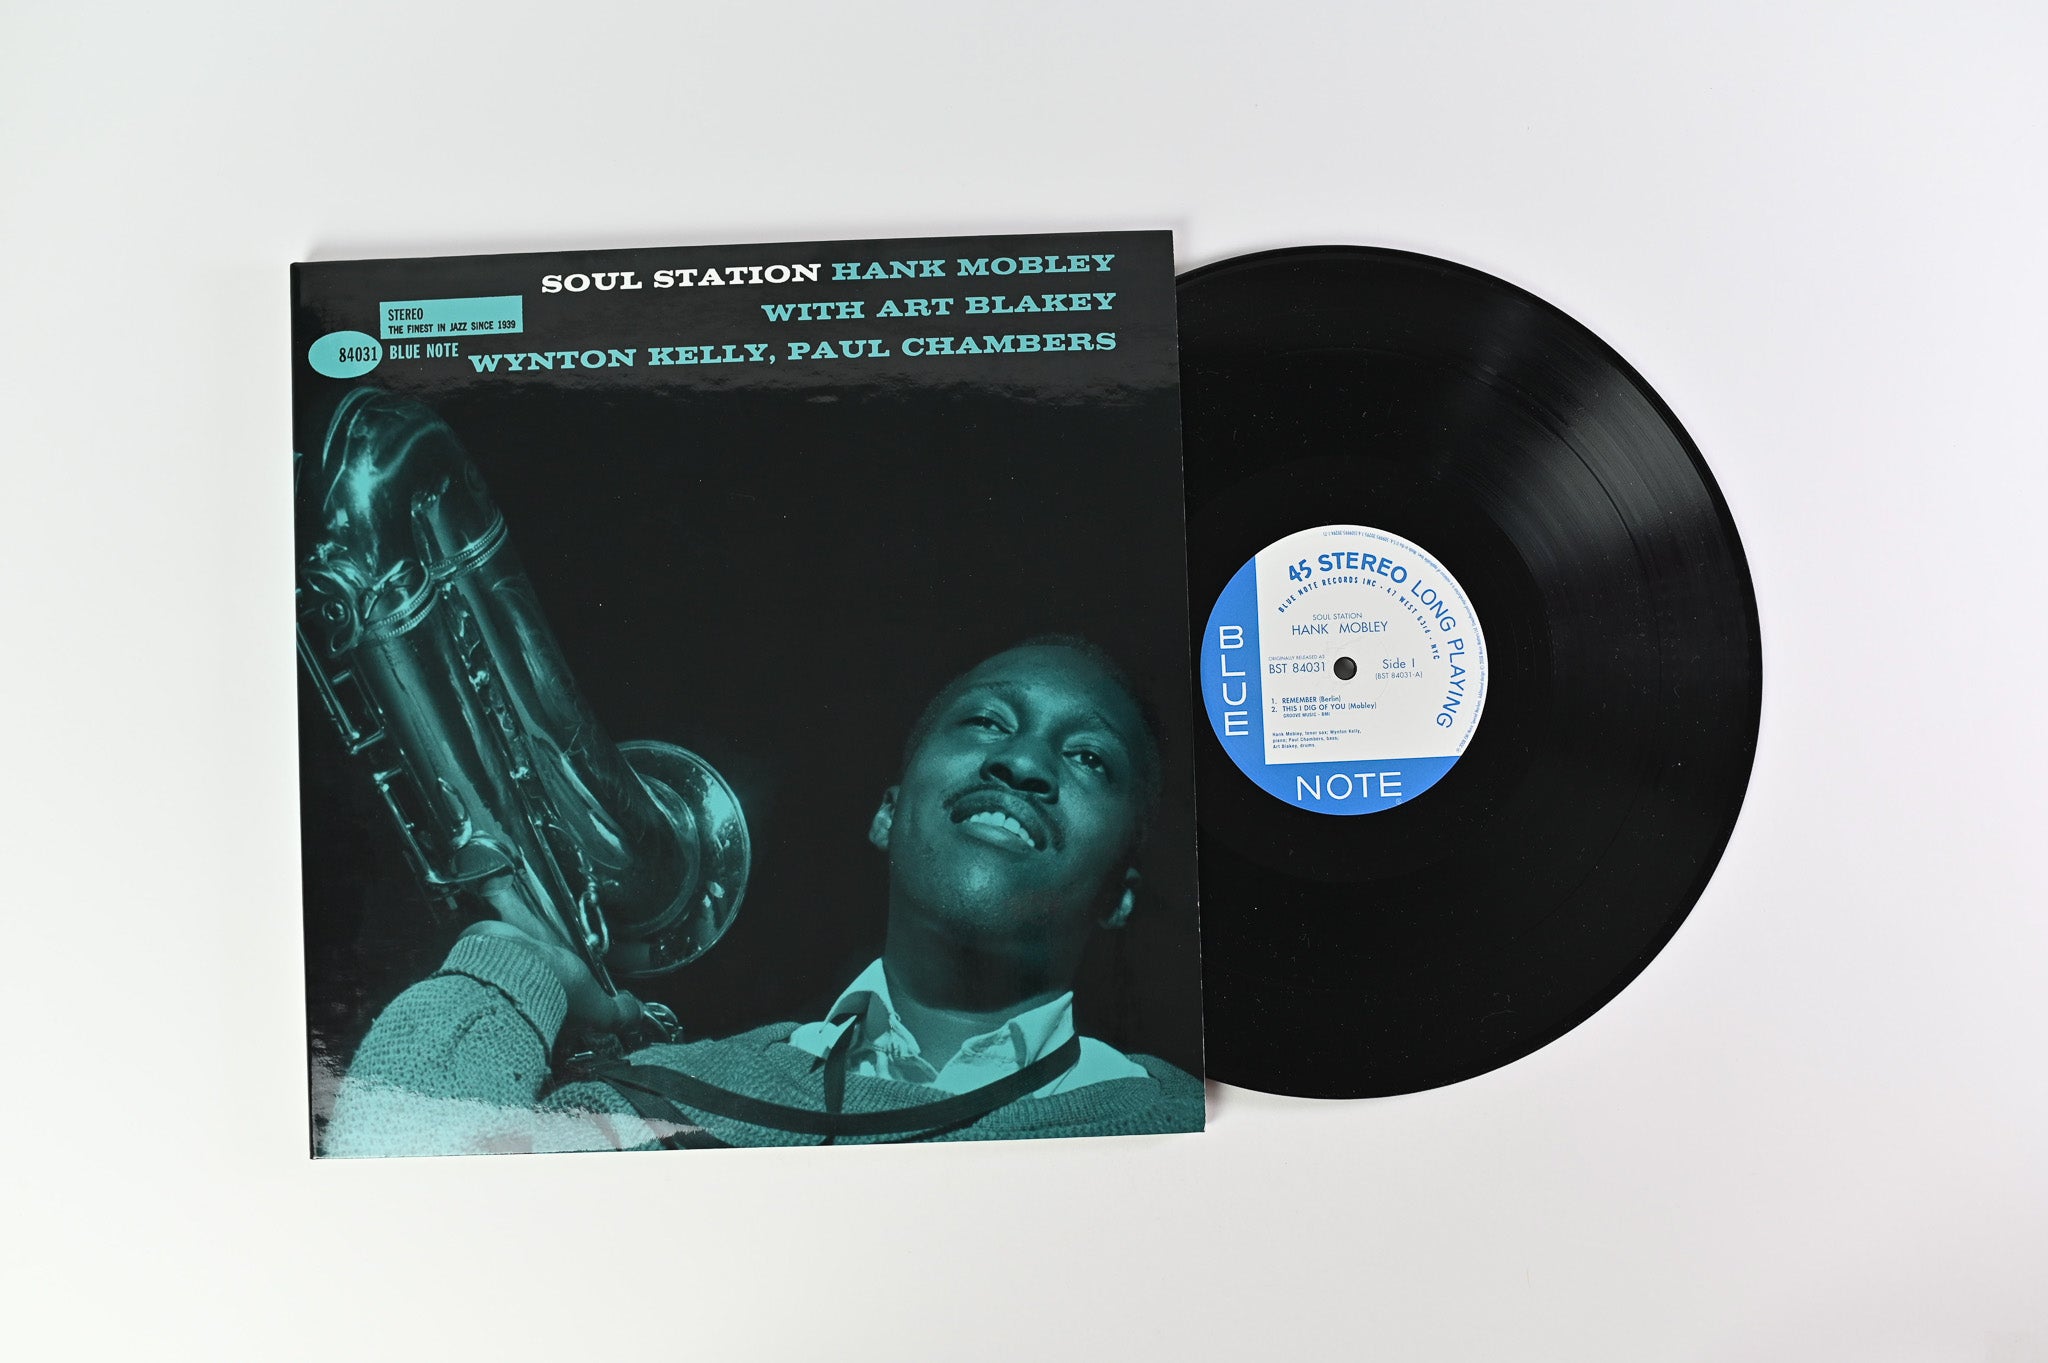 Hank Mobley - Soul Station on Blue Note Music Matters 45 RPM Reissue